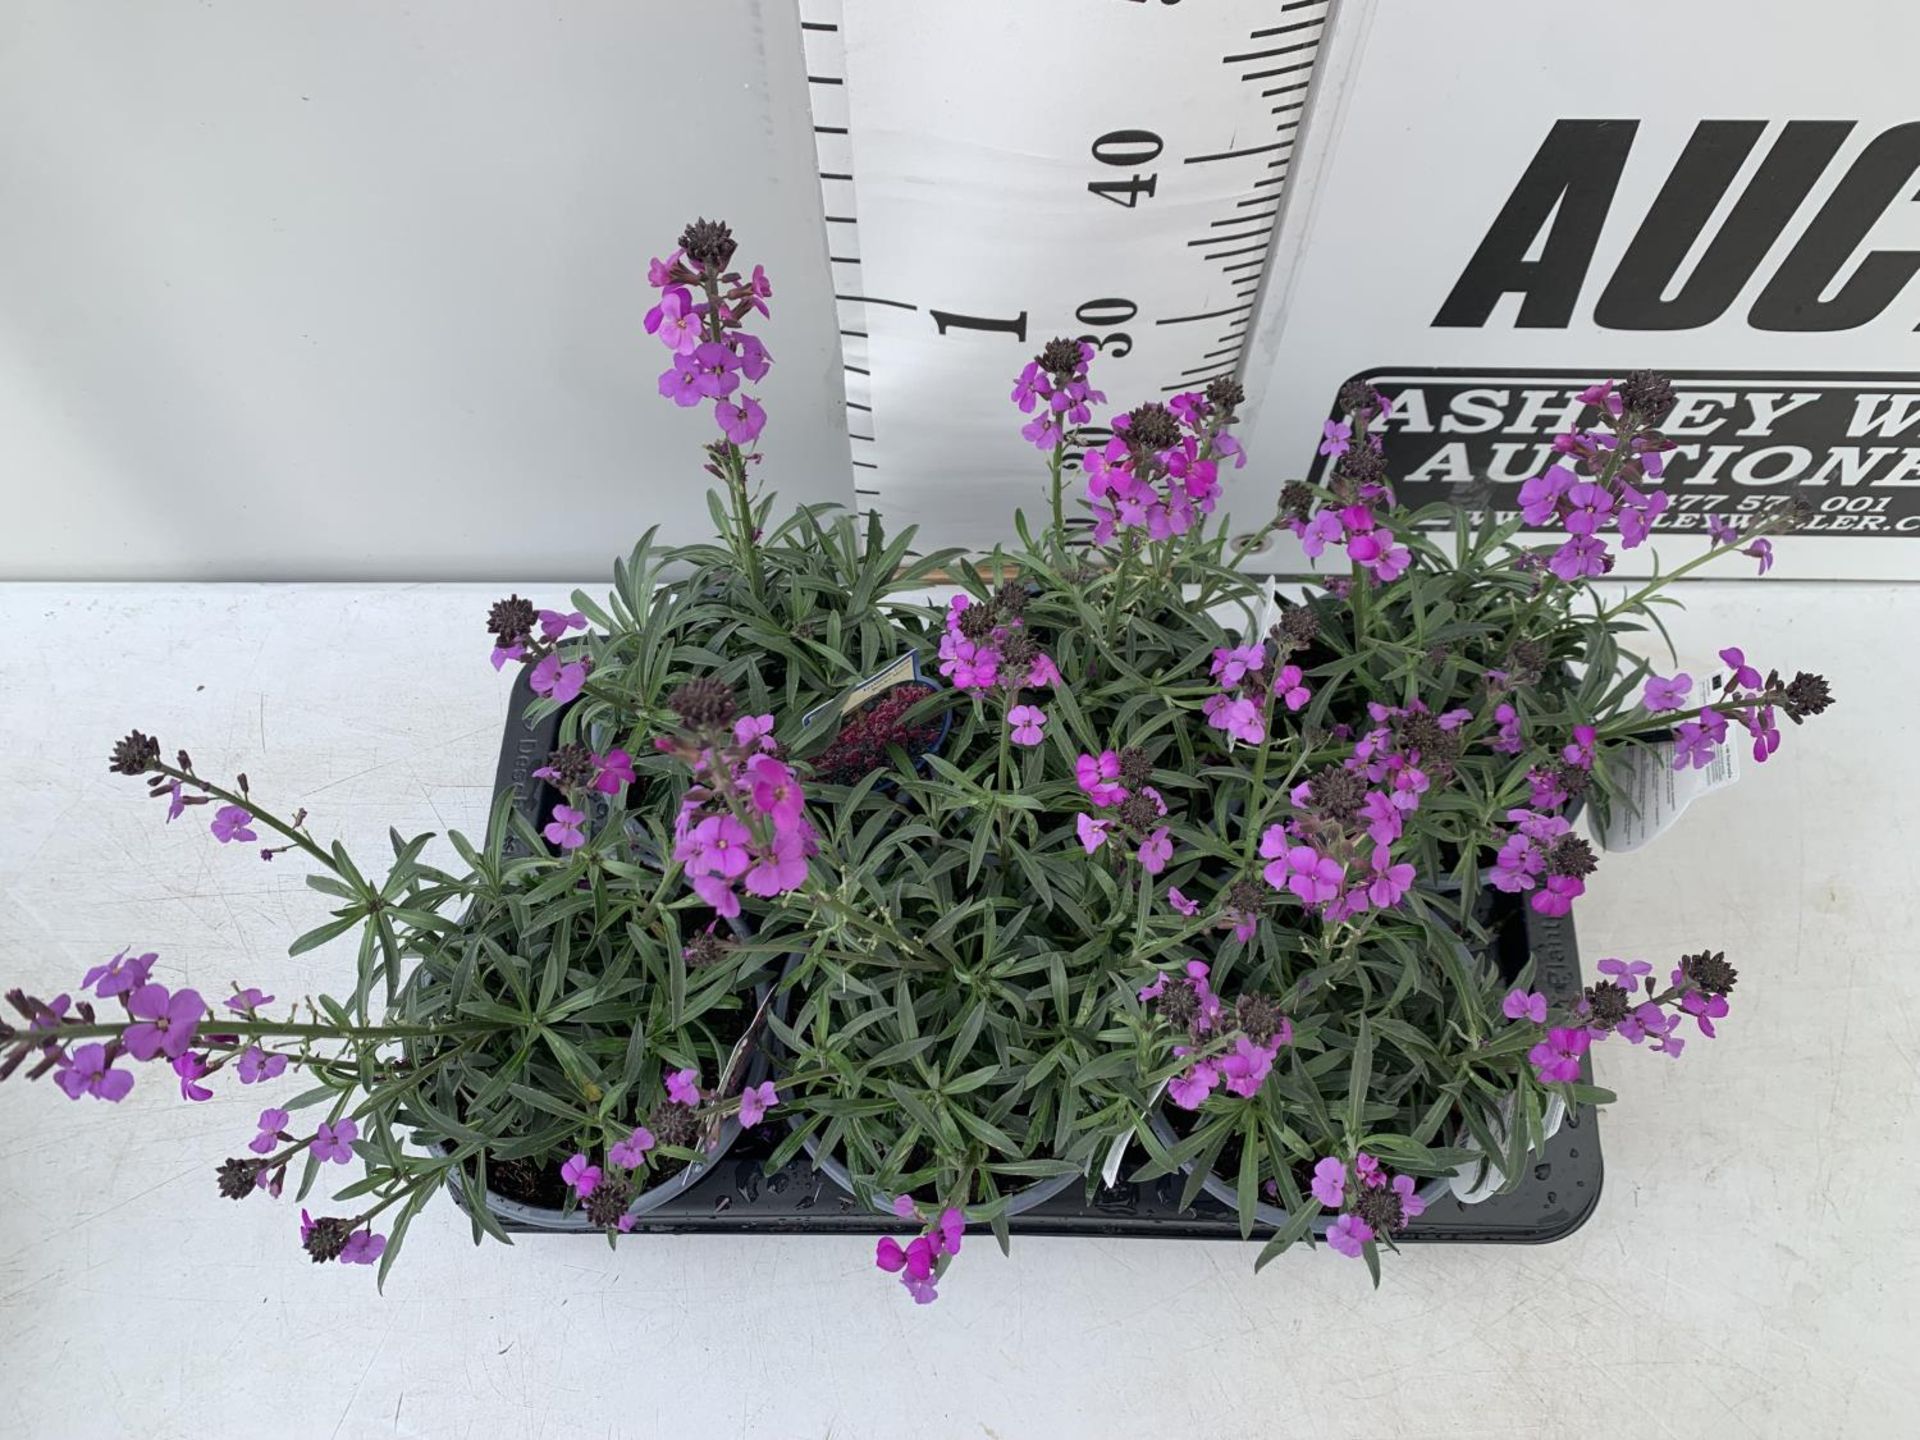 SIX ERYSIMUM BOWLES MAUVE IN 2 LTR POTS 40-50CM TALL TO BE SOLD FOR THE SIX PLUS VAT - Image 2 of 5